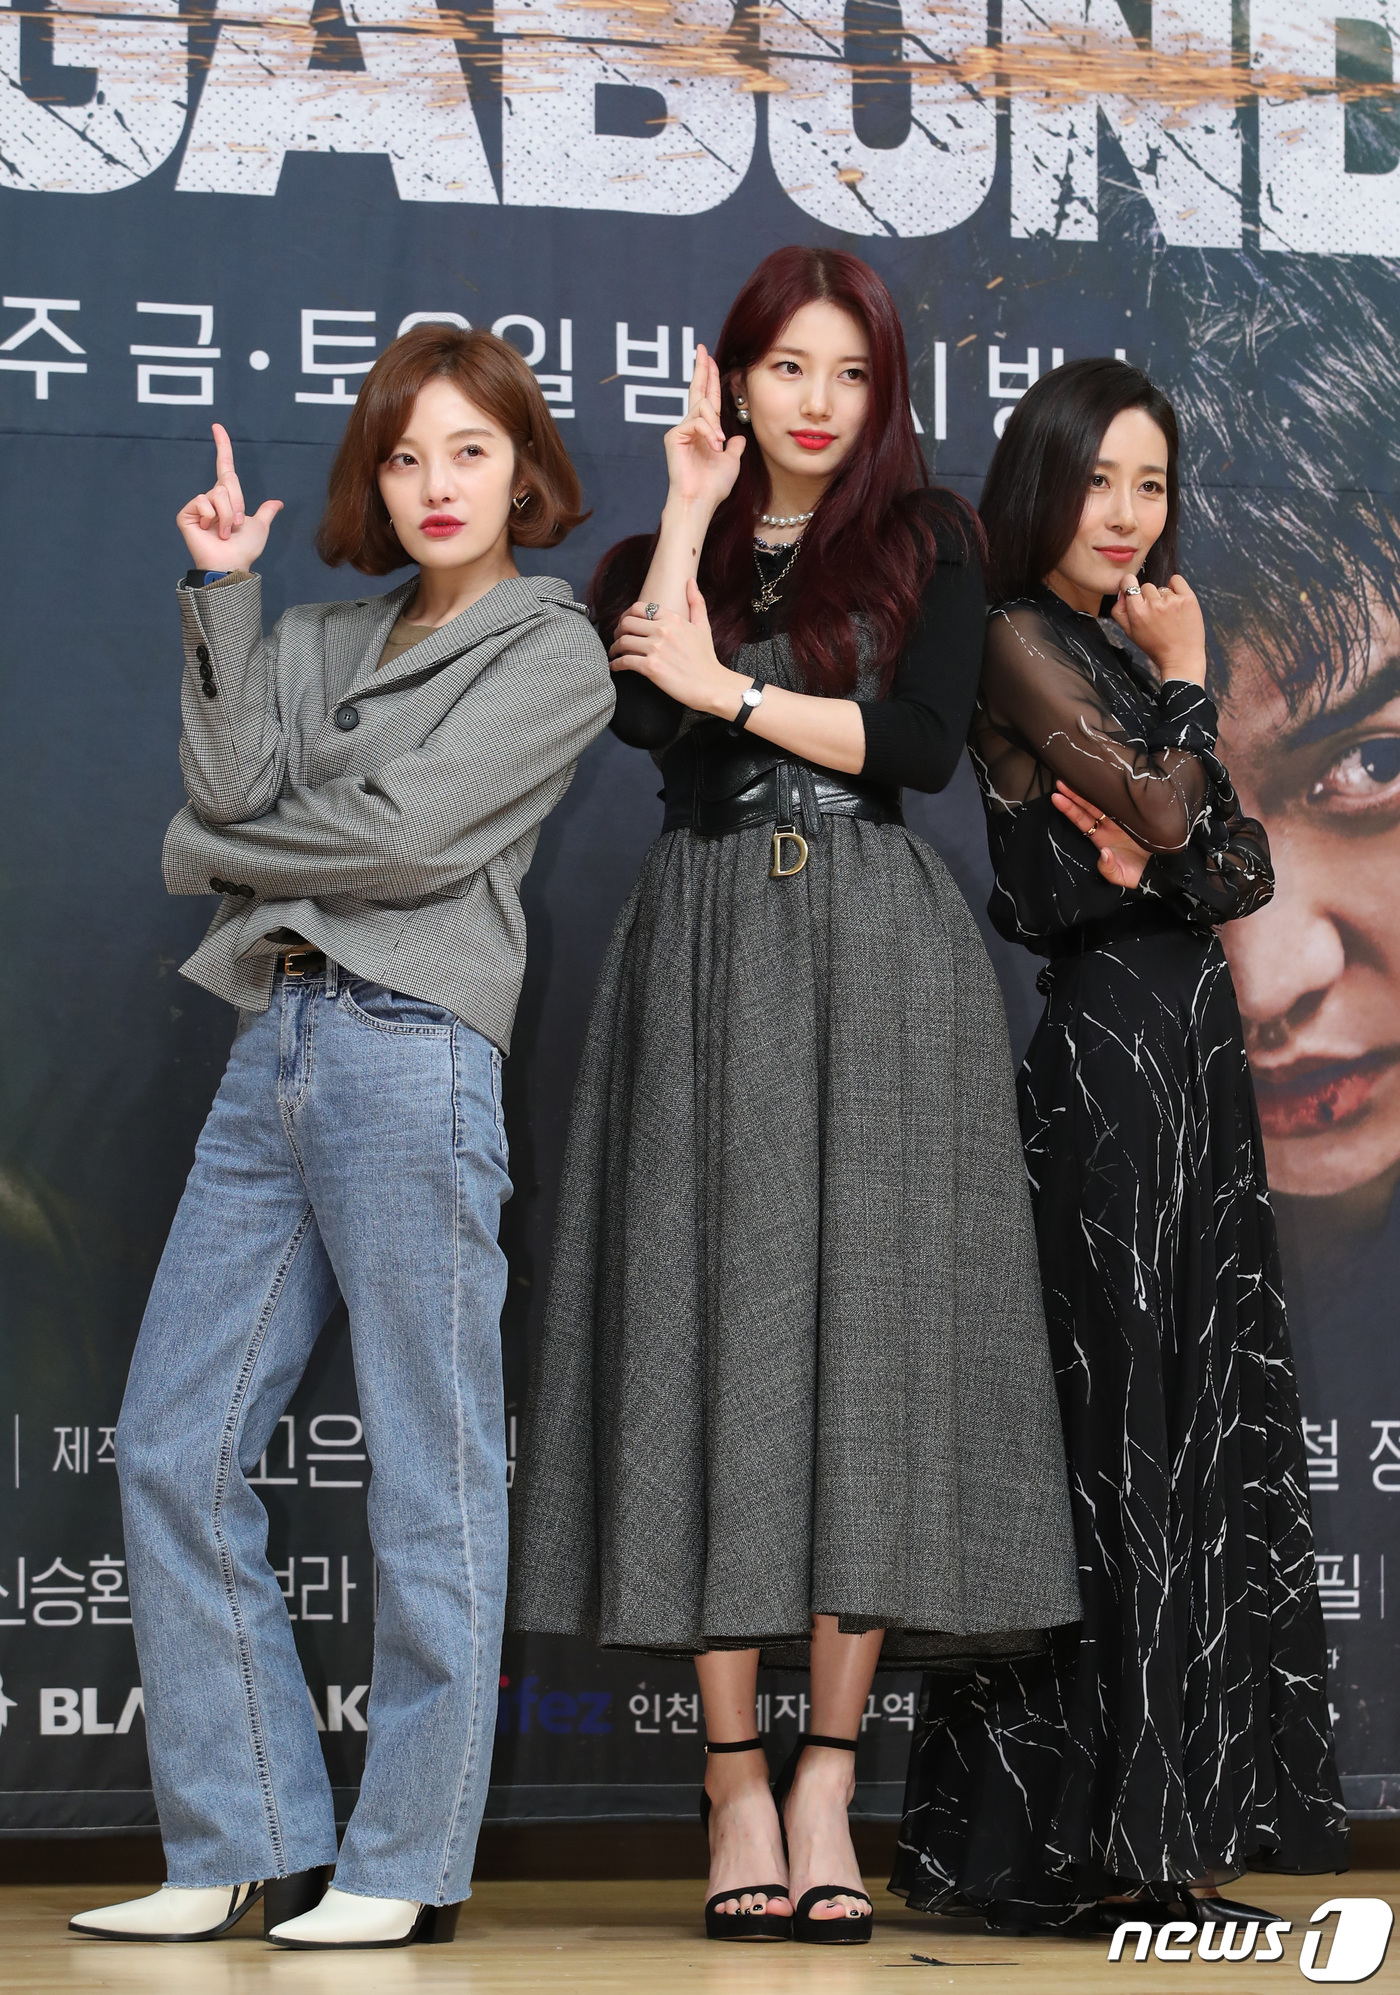 Seoul=) = Lee Seung-gi Bae Suzy, reunited after more than six years, returns to the masterpiece Vagabond.Can Vagabond, which will be filled with intelligence action and melody, capture the attention of viewers?On the afternoon of the 16th, SBSs new gilt drama Vagabond (Vagabond) production presentation was held at SBS Hall in Mok-dong, Yangcheon-gu, Seoul, and Lee Seung-gi, Bae Suzy, Shin Sung-rok, Moon Jin-hee and Hwang Bo Ra attended.Vagabond is a drama depicting the process of a man involved in a civil airliner crash digging into a huge national corruption found in a concealed truth.It is an intelligence action melodrama with dangerous and naked adventures of Vagabond (Vagabond), who have lost their families, affiliations, and even their names.Director Yoo In-sik, who directed Giant, Salaryman Cho Hanji and Dons Avatar, and Jang Young-chul Young-sung, who wrote it, coincided.Yoo In-sik said, I am glad that many people have been preparing for a long time and have been throwing time and passion for a long time, and many people have helped me at home and abroad.The secret political thriller Melody is an exciting drama with a lot of things in it.I wanted to make a drama that was so exciting, so interesting that I could not bear the next episode.I have been shooting for 11 months, so it would be hard if any one of you showed any discomfort or had a non-cooperative person. Wherever we go, we will be the end king. I saw you showing the ensemble here.Lee Seung-gi Bae Suzy, who reunited in five years after MBC Kuga no Seo, starred in the drama.Lee Seung-gi is a hot-blooded stuntman, Cha Dal-gun, who has a dream of catching up with the action film industry by using Jackie Chan as a role model.In addition, Bae Suzy hides the identity of the NIS staff and serves as a black agent who works as a contract worker for the Embassy of the State Morocco Korea.Lee Seung-gi said, I heard that I was preparing for this work after having a drink and eating with Yoo In-sik and the director of the shooting team before the military discharge, and at that time I started to think that it would be fun because I was so excited about military.I started with the anxiety that this is going to be good. Everyone prepared it perfectly, and it was more fun than the script, and there was no burden because we made such a production that could give the highest fun we could imagine without harming the drama. Bae Suzy, who challenges intelligence action, said, I was very curious and excited because I have never done the spy action genre.I thought that the character of Gohari would be very attractive and I wanted to see Harry growing up. I liked the role of Gohari.There are some things I wanted to learn while working with Yoo In-sik, and I learned a lot with many seniors.I also want to worry about the acting part and grow up with Harry, so I hope that those parts will be shown well in Drama. Also, about the reunion, Bae Suzy said, I met in six years and met with my breathing.When I breathed, it remained a very good memory, so when I did it again, it was very nice and it made it easier to shoot with better breathing. Lee Seung-gi also said, I think it is not easy to meet again in other works, especially when I meet with a representative actress like Bae Suzy.It was good at that time, but the acting side was good, and it was such an actress. It was really good, Attitude was so good, and many of the scenes on the spot were very positive.I have a lot of physical difficulties, but I think I have taken it easily because I did not have a frowned expression. Shin Sung-rok is divided into NIS inspector general Kitaewoong, who is dispatched to Morocco to catch the accomplice of the plane attack and is hit by a chadalgun.Shin Sung-rok, who emphasized that it was a different role from the previous one, said, It was hard to express what I had to cut down a lot internally so that I felt that there was nothing I could do.And it was hard to express that I was shaking inside. Moon Jin-hee plays Jessica Lee, Asia President of John Enmark, and will lobby rival Adward Park (Lee Kyung-young) and the Ministry of National Defense for the South Korea next-generation fighter business.As a woman, he is a lobbyist who has risen to a very difficult position by overcoming prejudice and discrimination, he said. As soon as I get the script, I do this in Korea?I thought of a series of events, but I felt the color and charm that I could show through this drama. In addition, Hwang Bo Ra is a member of the NISs seven-nation staff and the closest to Harry, the NIS motive, the republican, to help collect all sorts of information.I made my debut with SBS bond talent in 2003 and I met with Jang Young-chul Jingyong-sun.Its so touching, he said.Especially, Vagabond, which has been preparing for a long time, started to read the script in June last year and finished shooting in May.In particular, the amount of overseas location shooting and production cost of about 25 billion won between Morocco and Portugal has been a hot topic.Lee Seung-gi said, Local staffs said that they had put it in their hands among the Dramas in the background of Morocco.I was very proud of it, but I feel good because I have heard such praise. In addition, ActionSindo is considered to be a sight to catch the eye.Lee Seung-gi said his military experience helped, I am still proud of the military and I like South Korea.I really know a lot of the importance of being and it is very strong to be masculinity learned in such a place.Basically, I learned similar things such as how to shoot, so I was able to make those parts quite confident and easy. Bae Suzy also said, We have been together for two months and have worked hard with the martial arts team and the basics. We have been training so much together.I also had a lot of shooting Sindo out and I also trained in shooting, he recalled.As the action is emphasized, there is also a voice of concern about the sense of delight with representative action movies such as This series.Lee Seung-gi said, It has been more than a decade since this series and there are a lot of real action.All actions are trained agents or agents whose physical abilities have risen to a special level, and we really start with a civilian accident that happens to happen to a nephew in a crash.I should not show anything that I have always talked with my boss with my mind, so I tried to relieve it rather than add it. Shin Sung-rok, who boasts a good sum with SBS, said, I think it will work out.I also feel that I have a lot of experiences that I have not done, feel in the field, and feel like I am going to be a new level of drama while watching such images.This time, it will be better. He emphasized that he will carry a total of 30% because he is not promised to the audience rating pledge.It is noteworthy whether Vagabond can capture gold and soil nights.Starting from 10 pm on the 20th, it will be broadcast every Friday and Saturday.